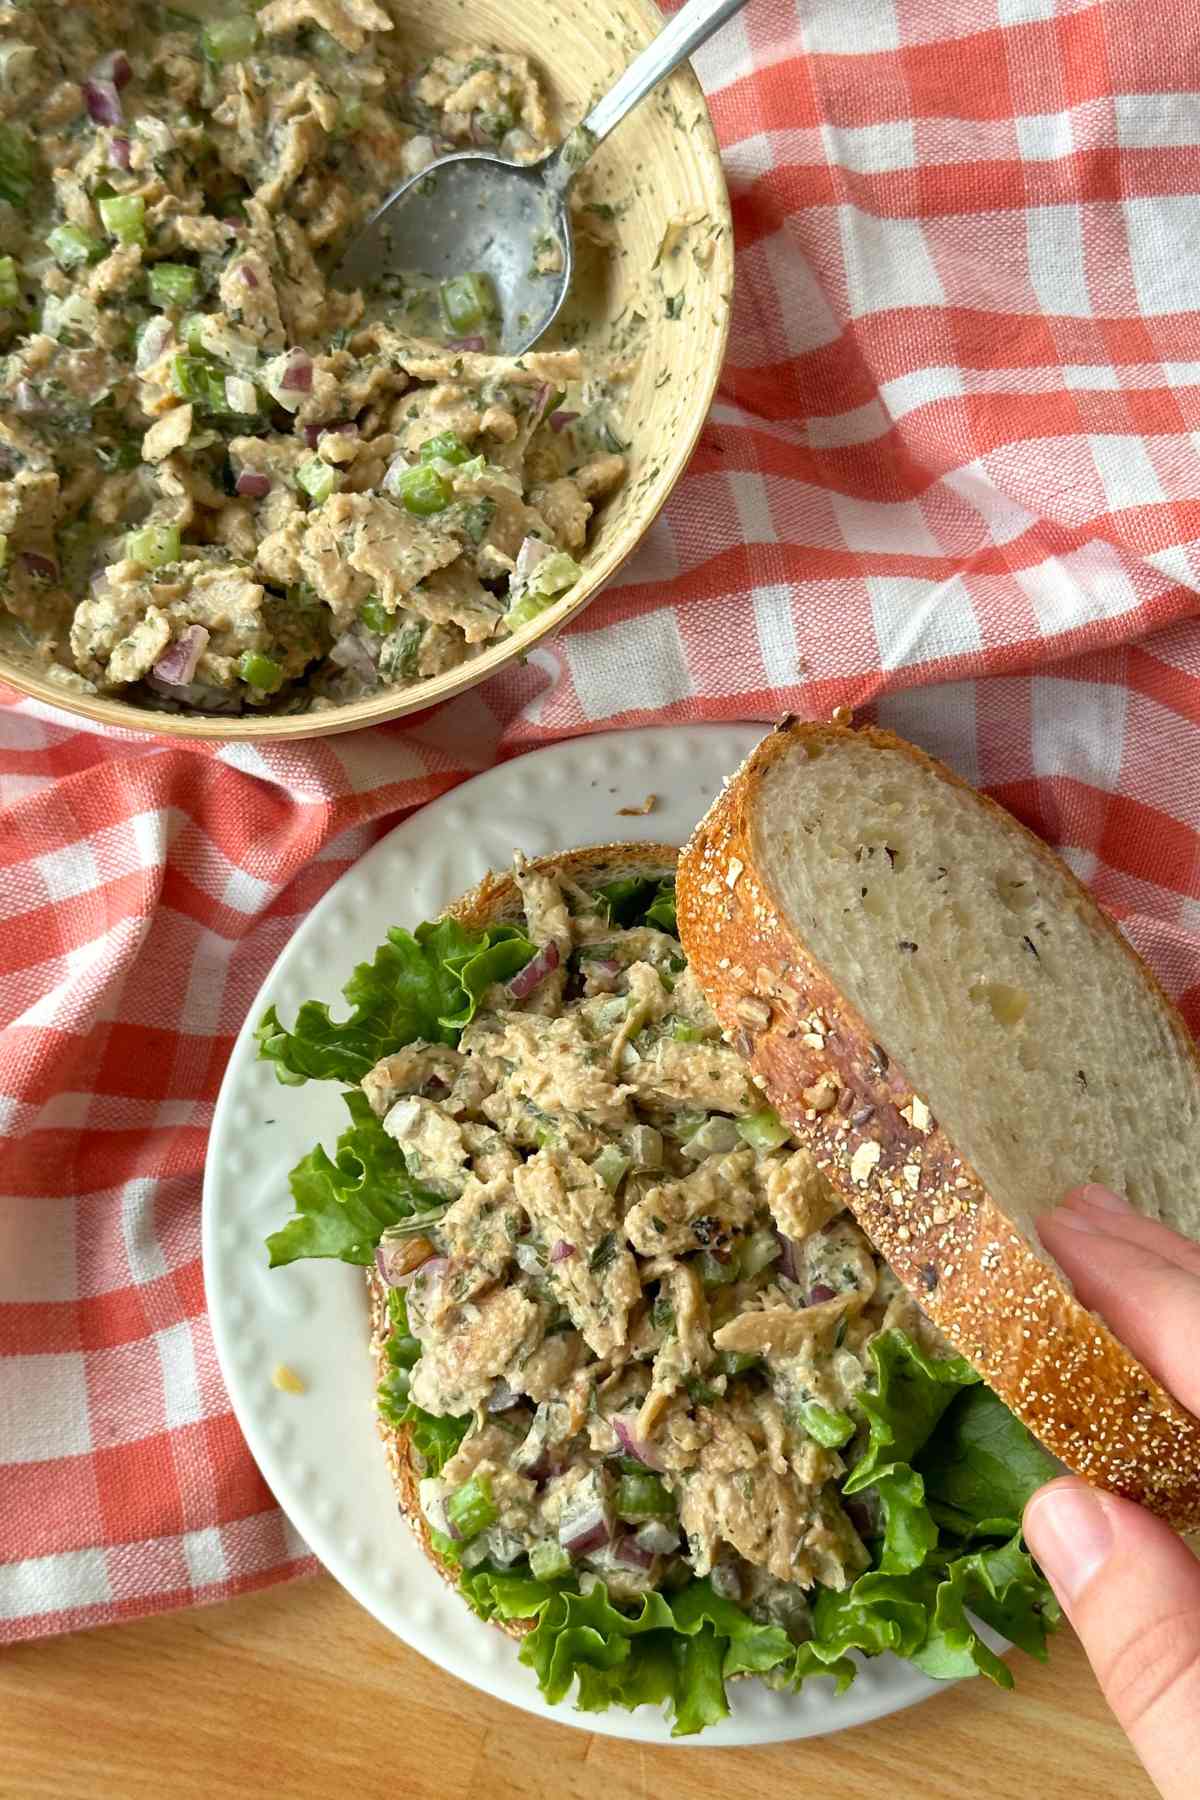 Vegan chicken salad on a sandwich with multigrain bread and large piece of lettuce underneath. The top slice of bread is being lifted up. In the background is the bow of vegan chicken salad on top of a red gingham napkin.